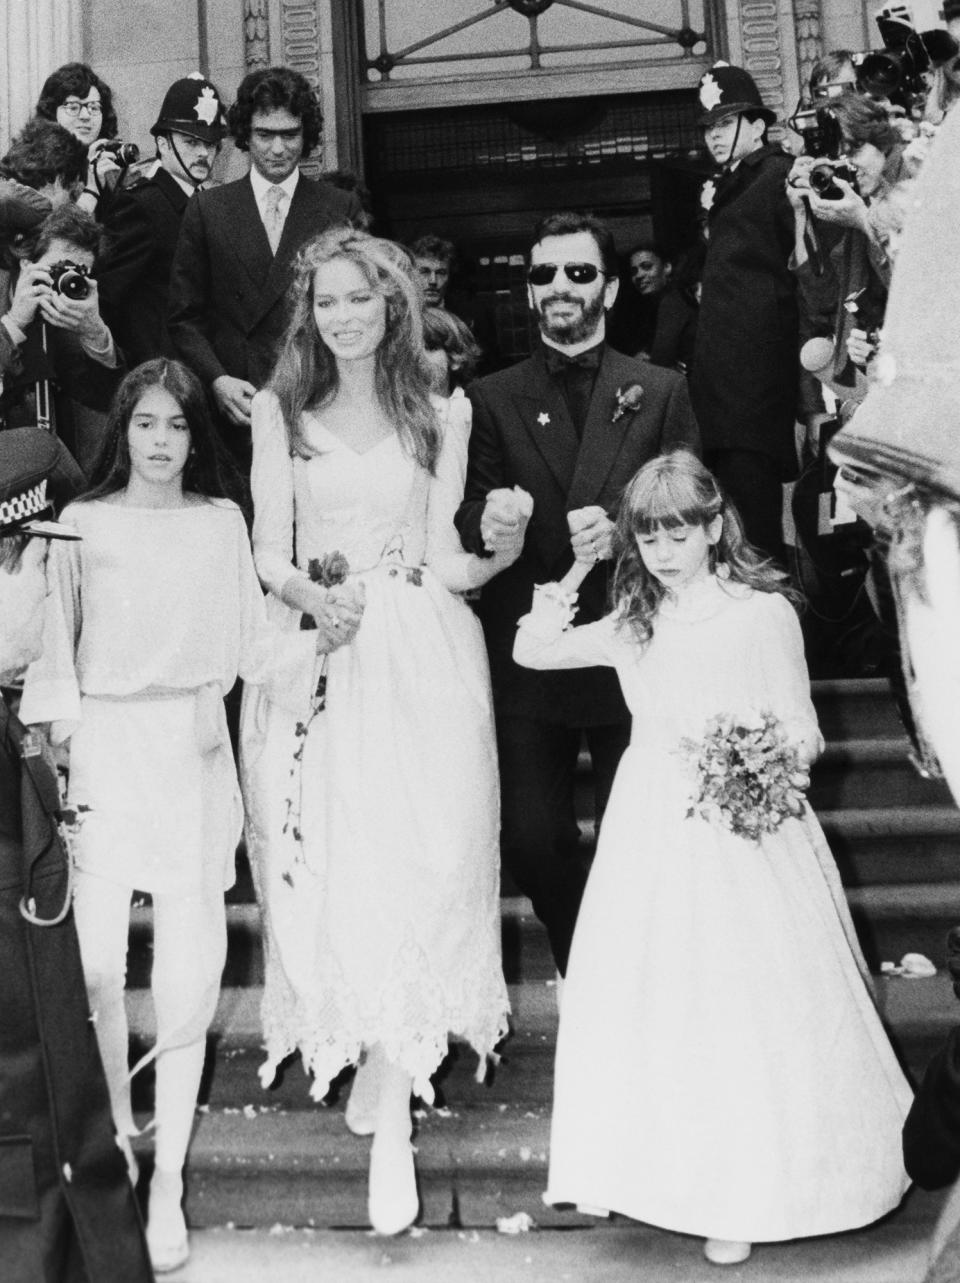 <p>The Beatle and the Bond girl were <span>married in London on April 27, 1981</span>. The reception was a mini Beatles reunion, including guests Paul McCartney and George Harrison, plus their wives and family. Tragically, John Lennon had been murdered on the streets of New York City less than five months earlier. The surviving friends had a loose jam session at Mayfair club: McCartney on piano, Harrison on guitar and Starr drumming on an upturned ice bucket with a knife and fork. Reportedly, they played the Beatles' classic "All You Need Is Love."</p>